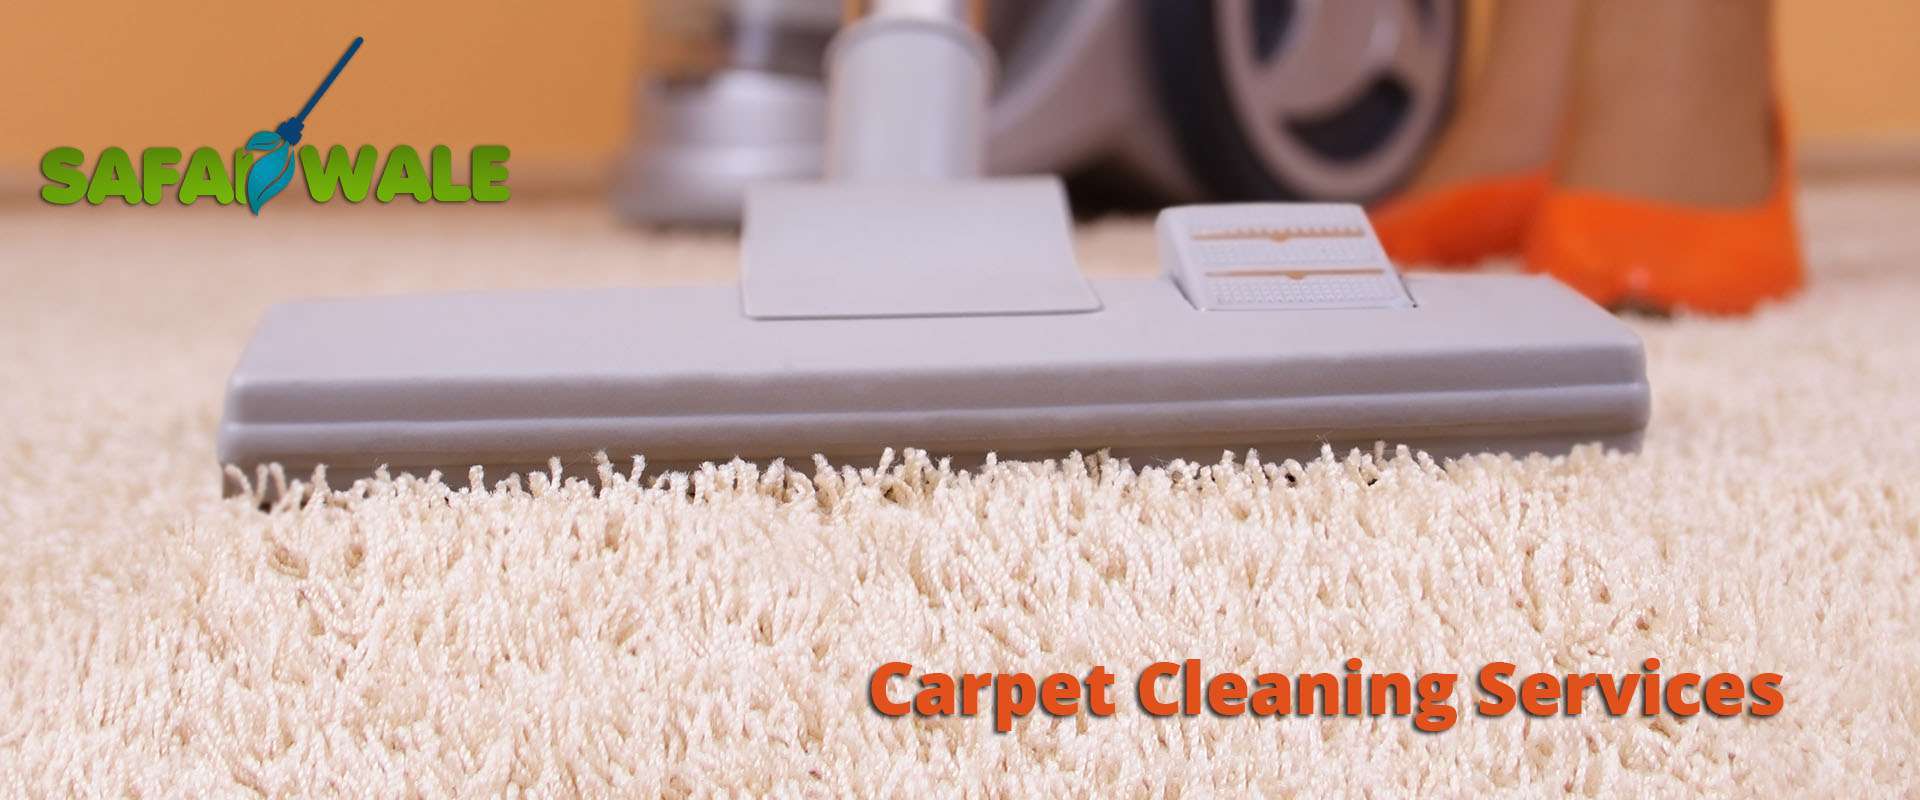 carpet cleaning services in Bhopal